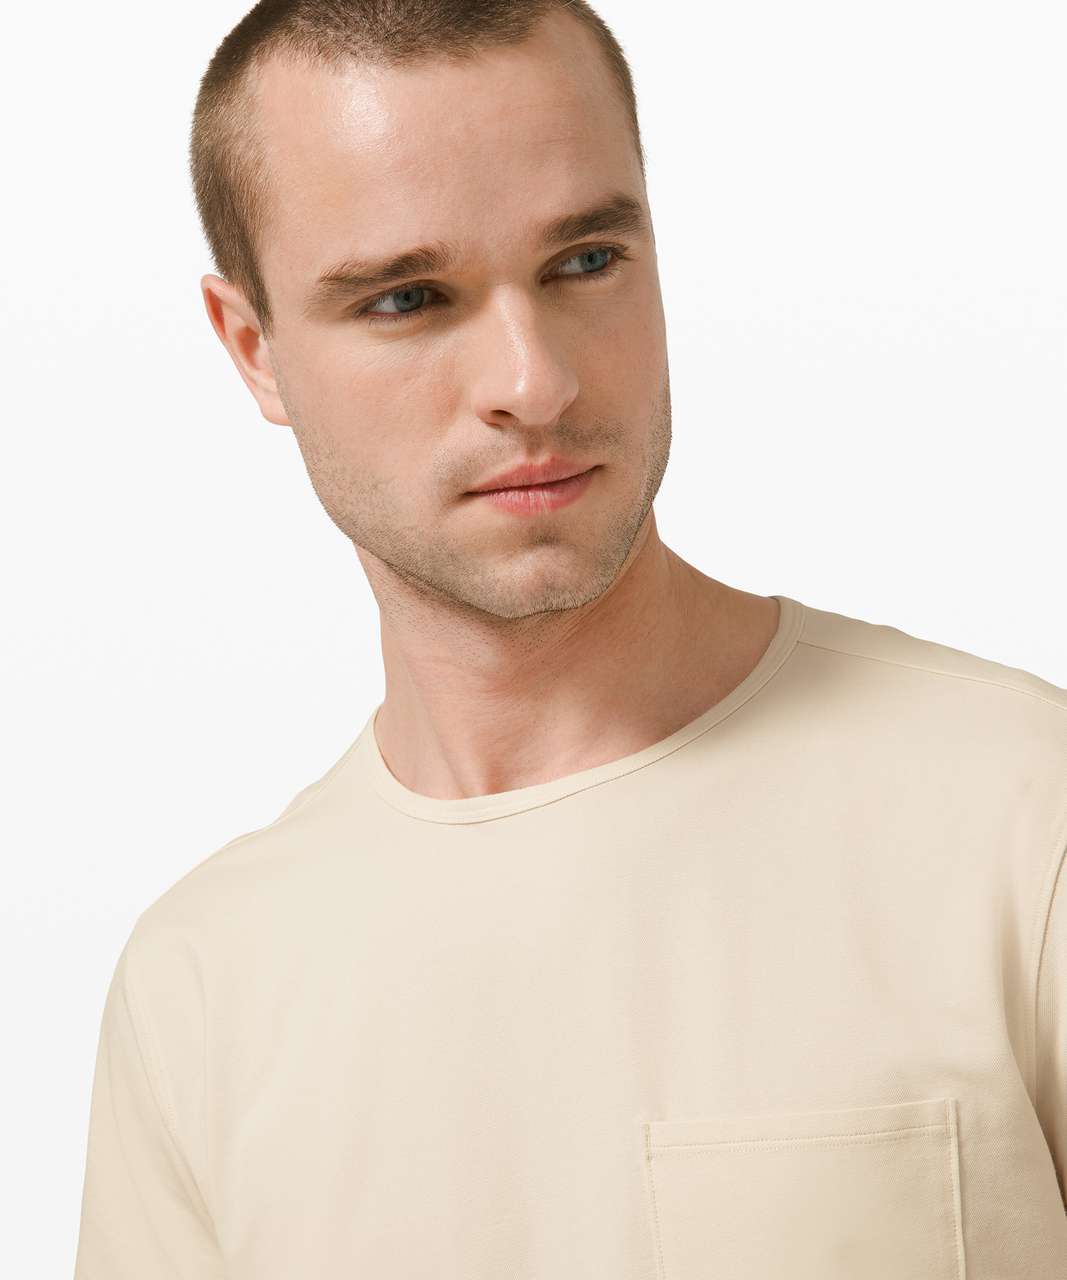 Lululemon Chest Pocket Relaxed Fit Tee - White Opal